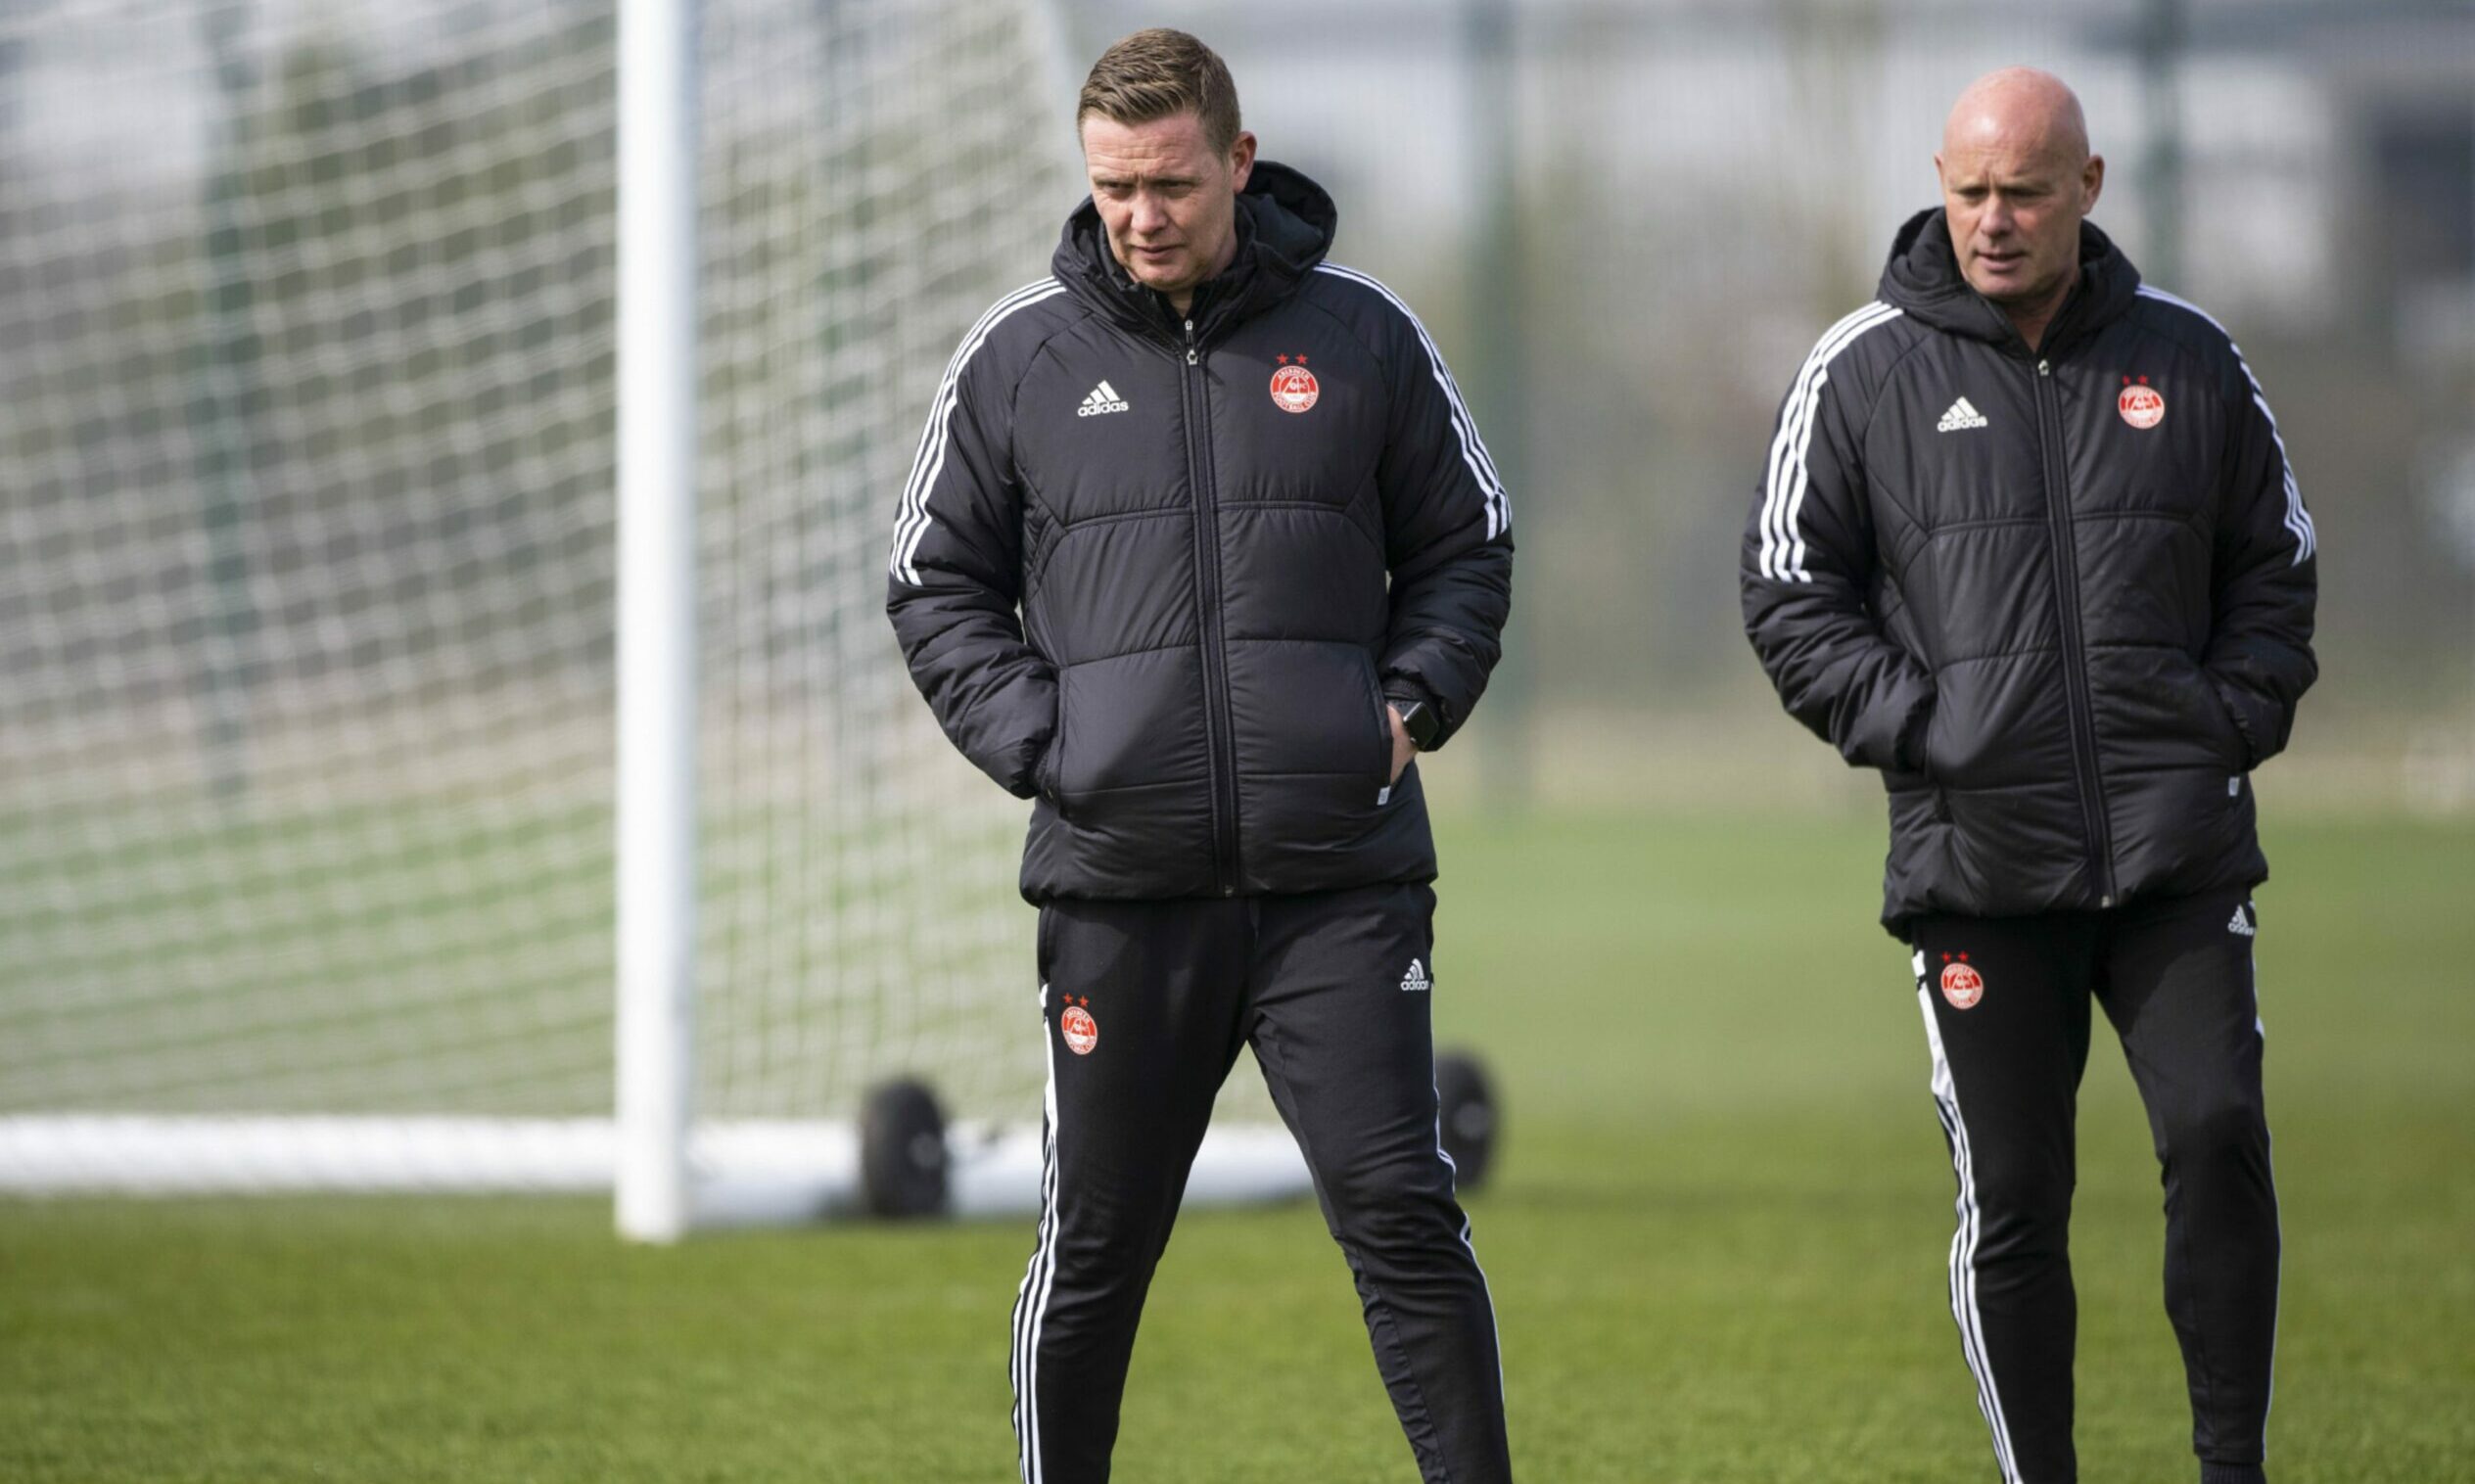 Barry Robson and assistant Steve Agnew next to the pitch during a training session